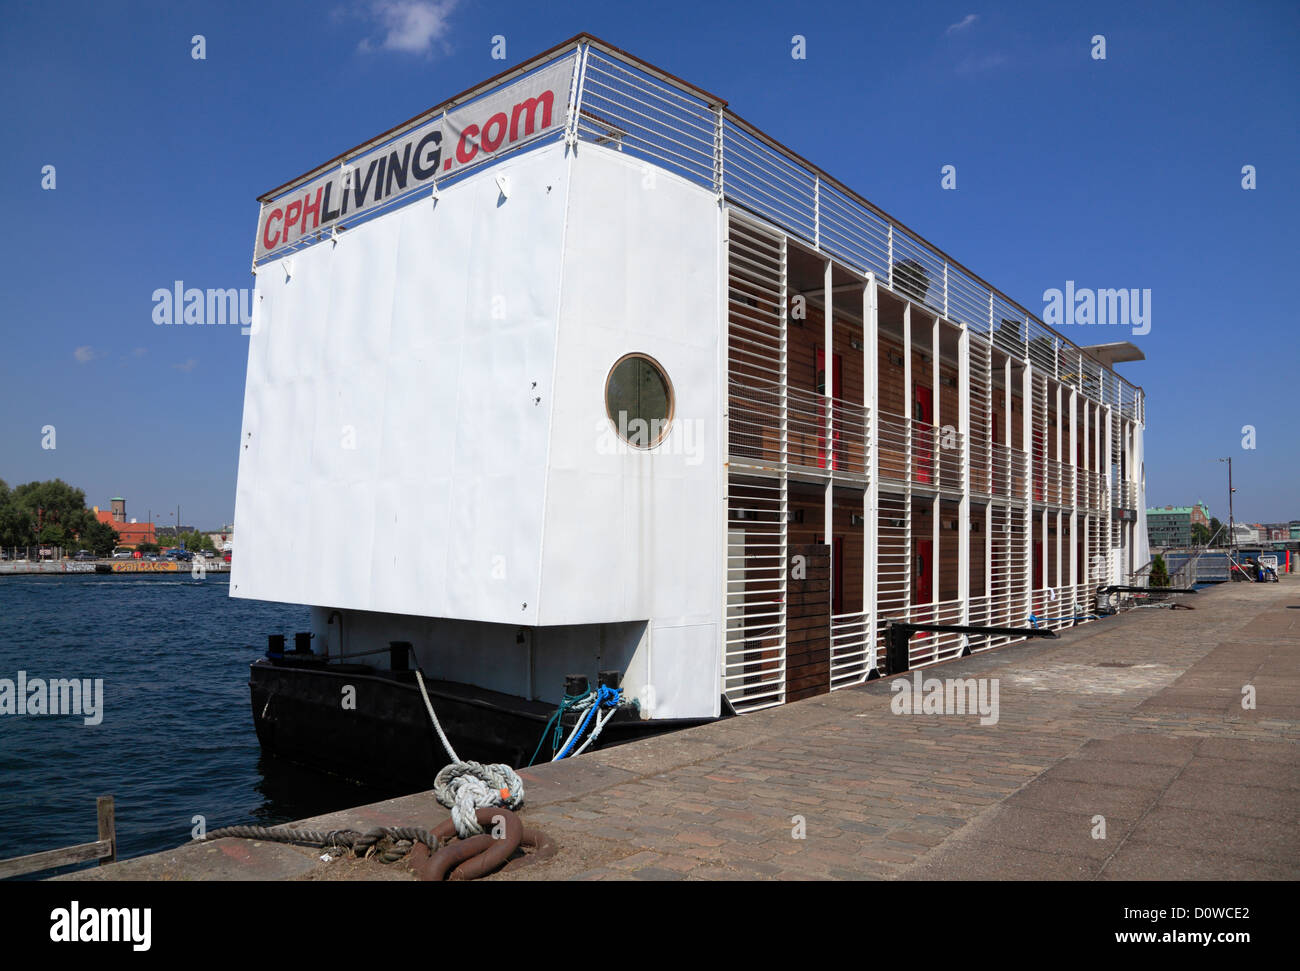 The floating boat Hotel CPHLIVING moored at Islands Brygge in central Copenhagen, Denmark. Stock Photo